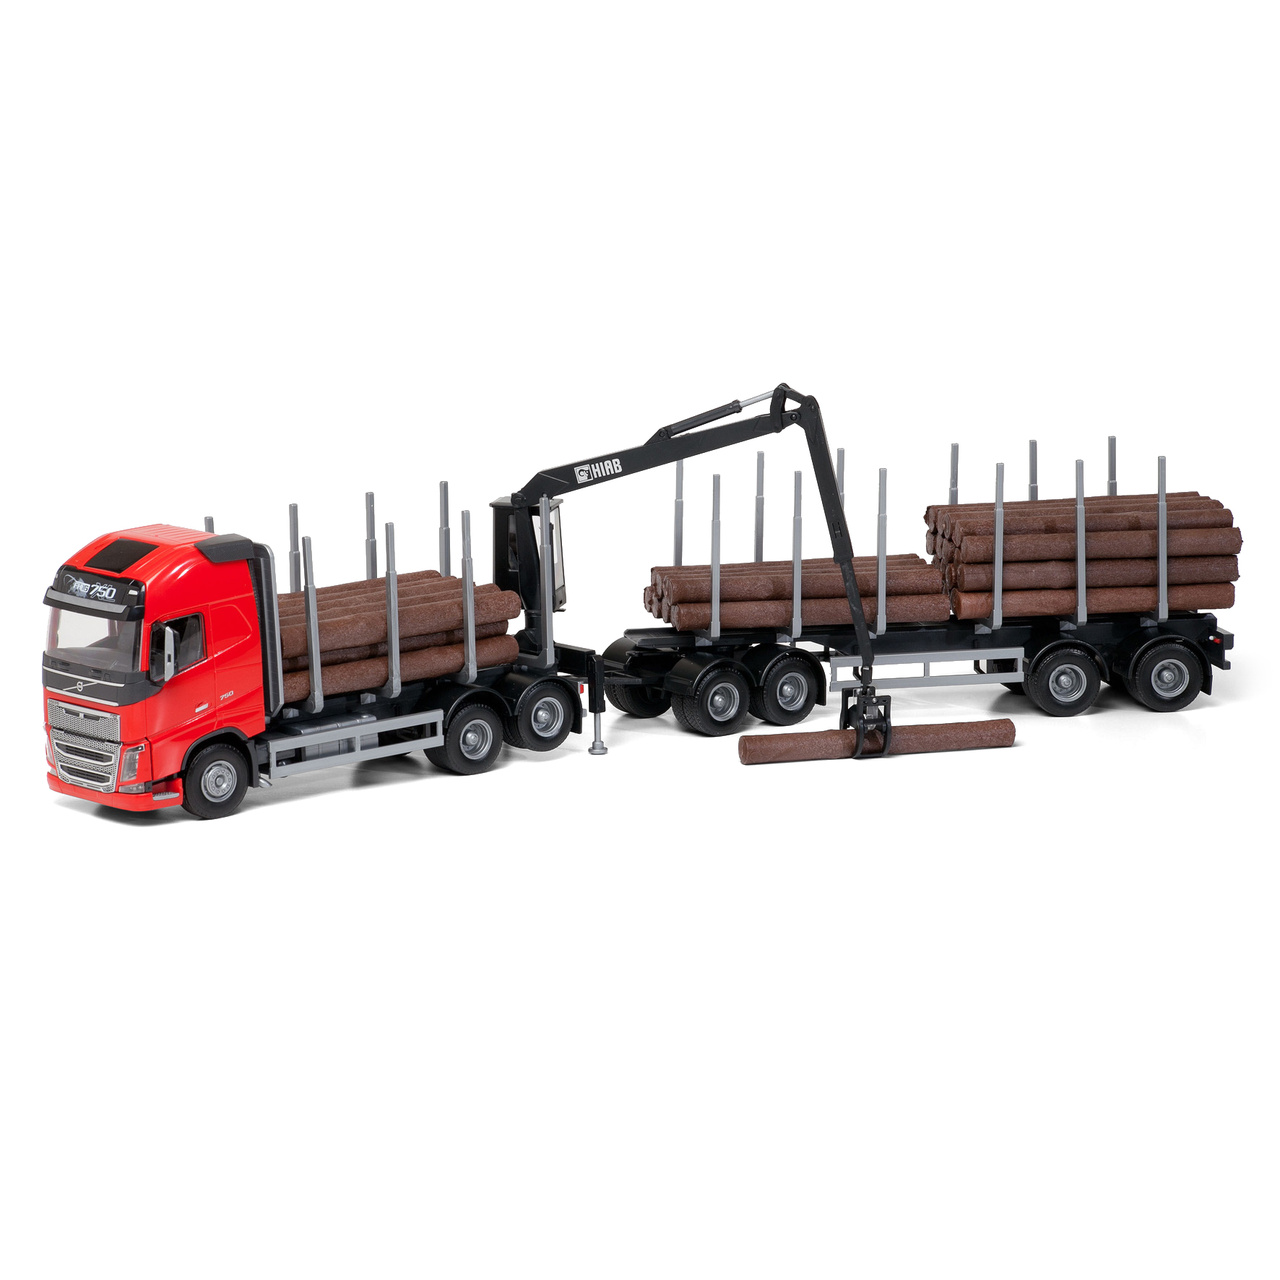 EMEK TOY CAR TIMBER TRUCK VOLVO FH16/750 RED 1:25